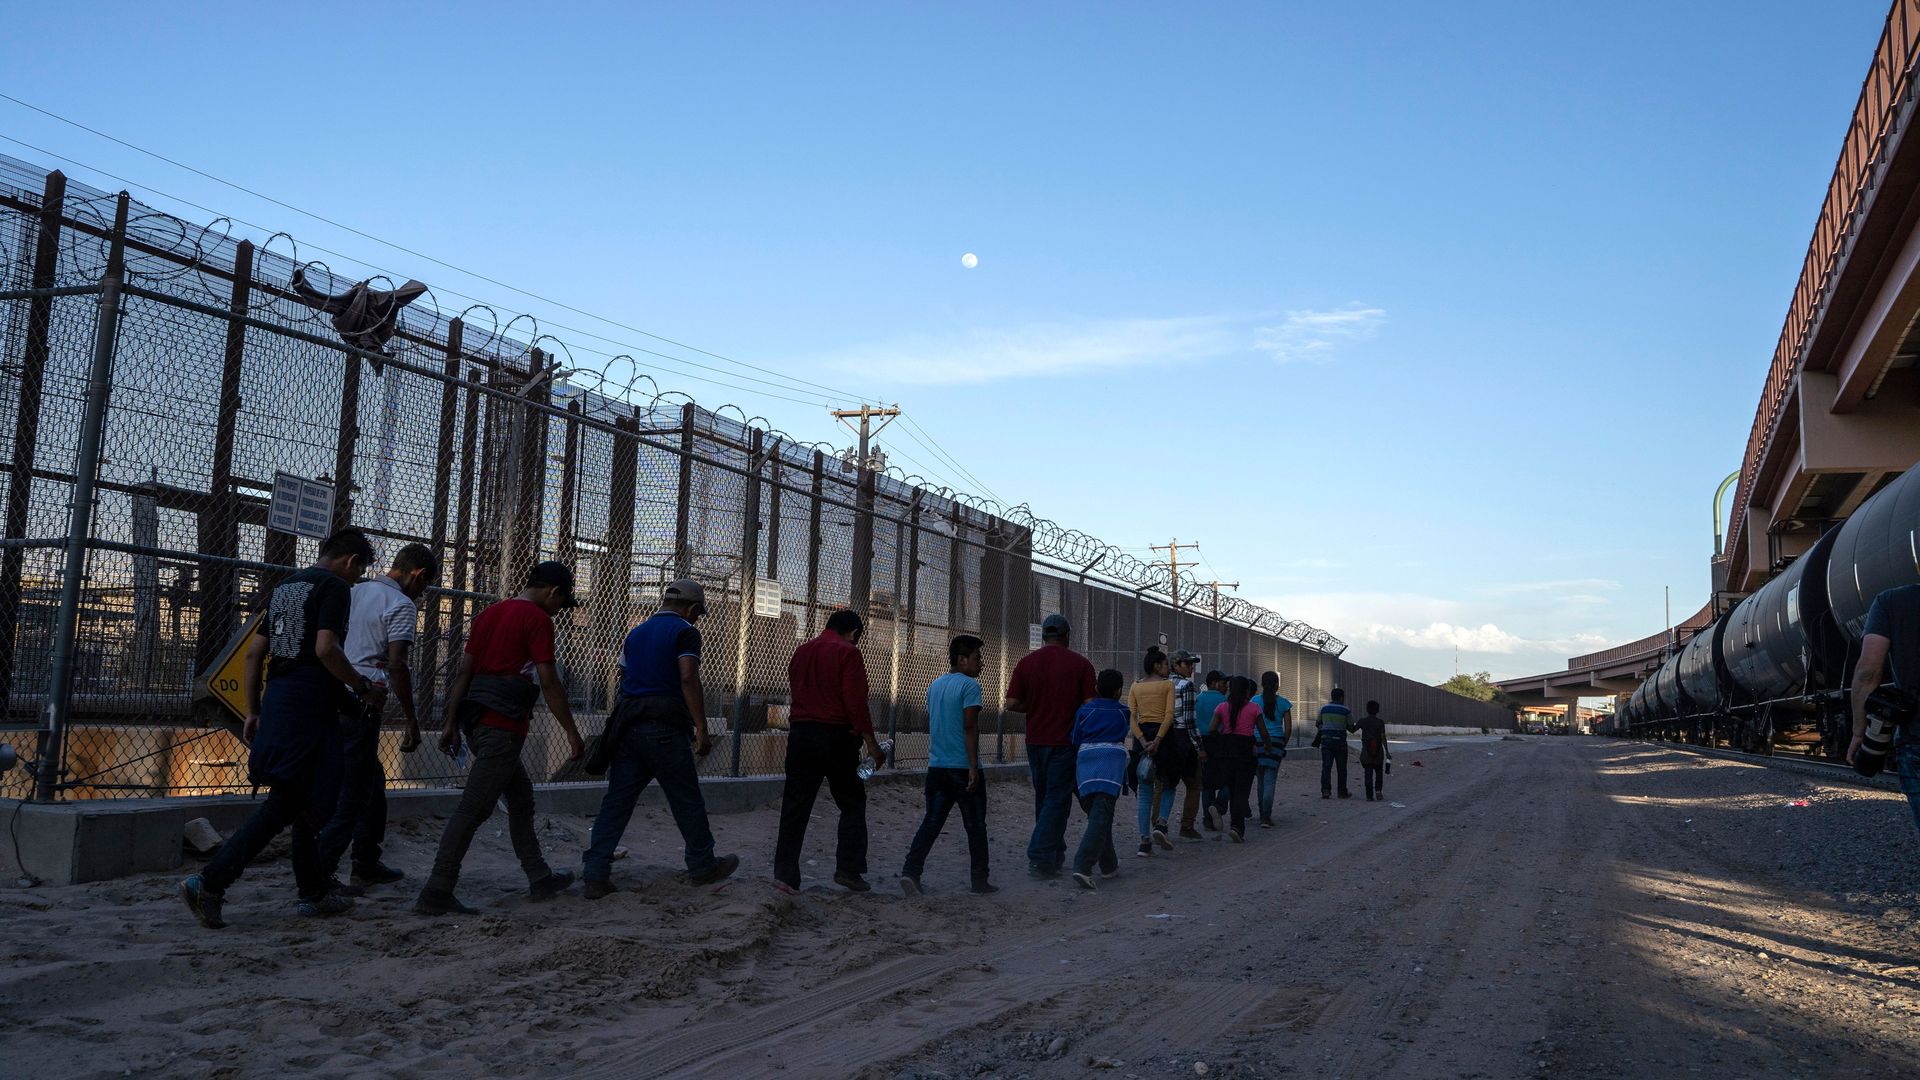 In this image, a line of migrants walk outside near a tall chain link fence.